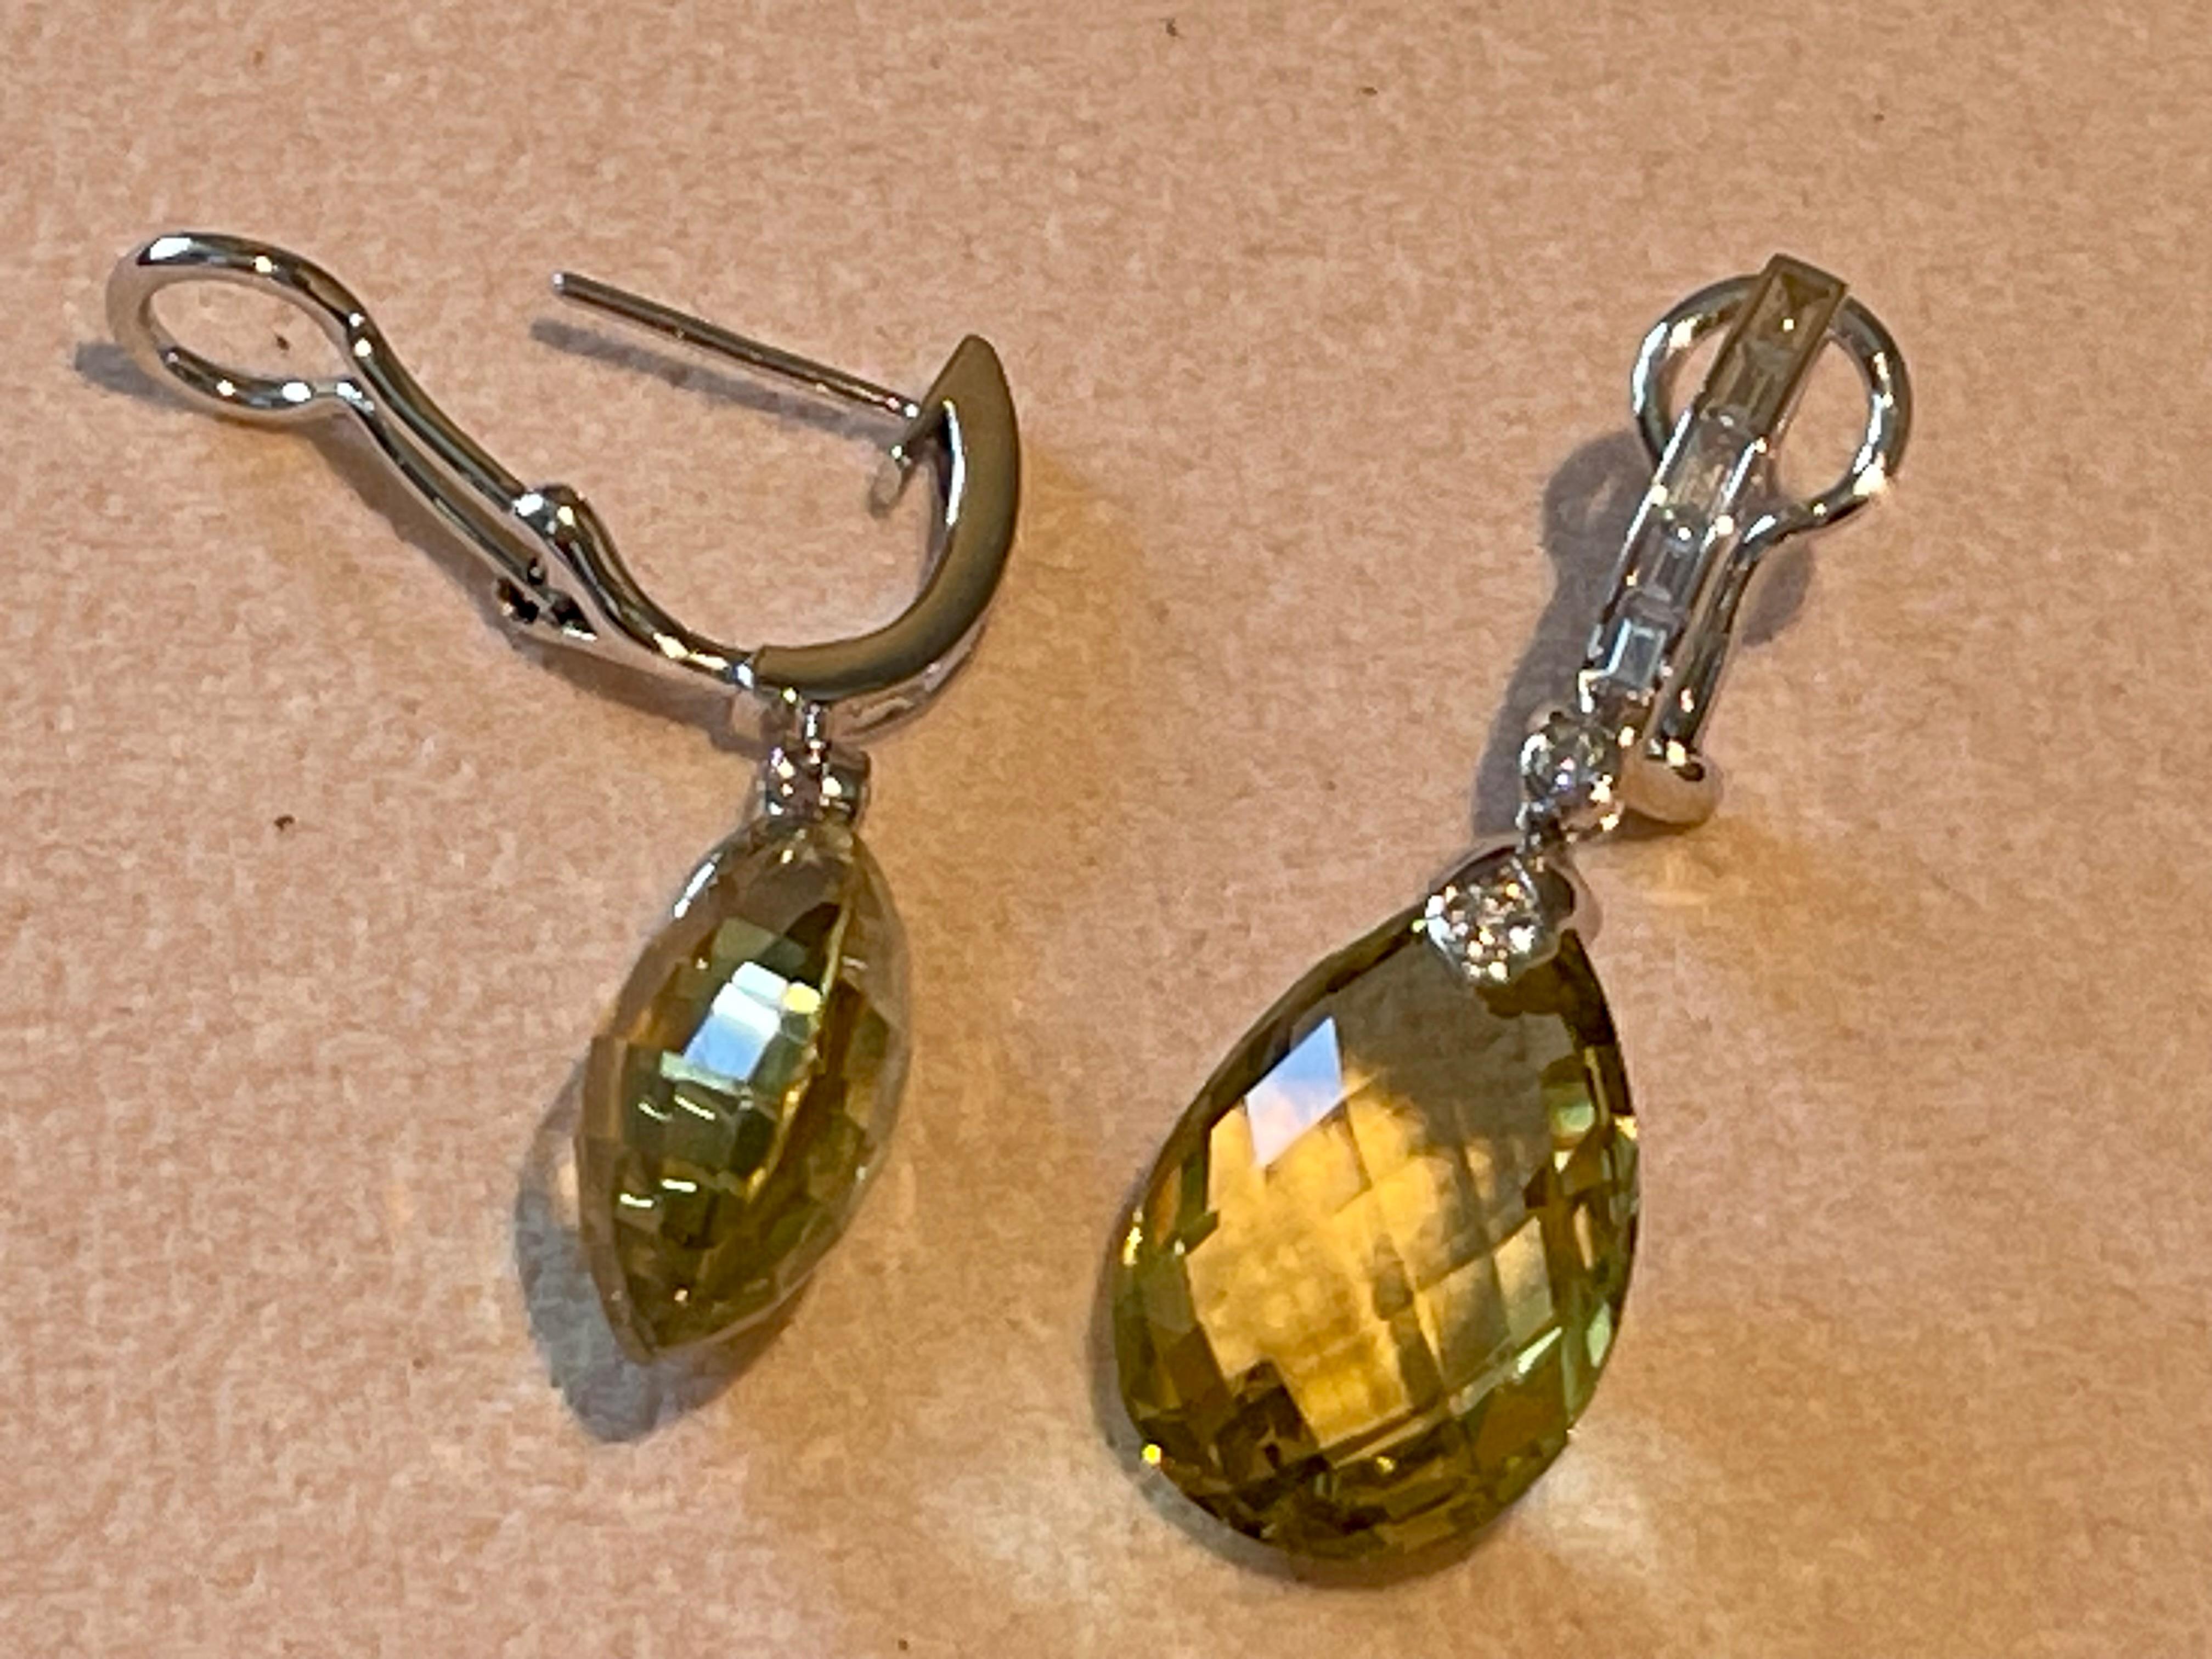 These Spectacular drop earrings are set with 2 stunning Briolette cut Lemon Quartz weighing 27.27 ct droppers which are a lovely clear lemon green colour and glisten beautifully in the light with many expertly cut facets that are truly magnificent.